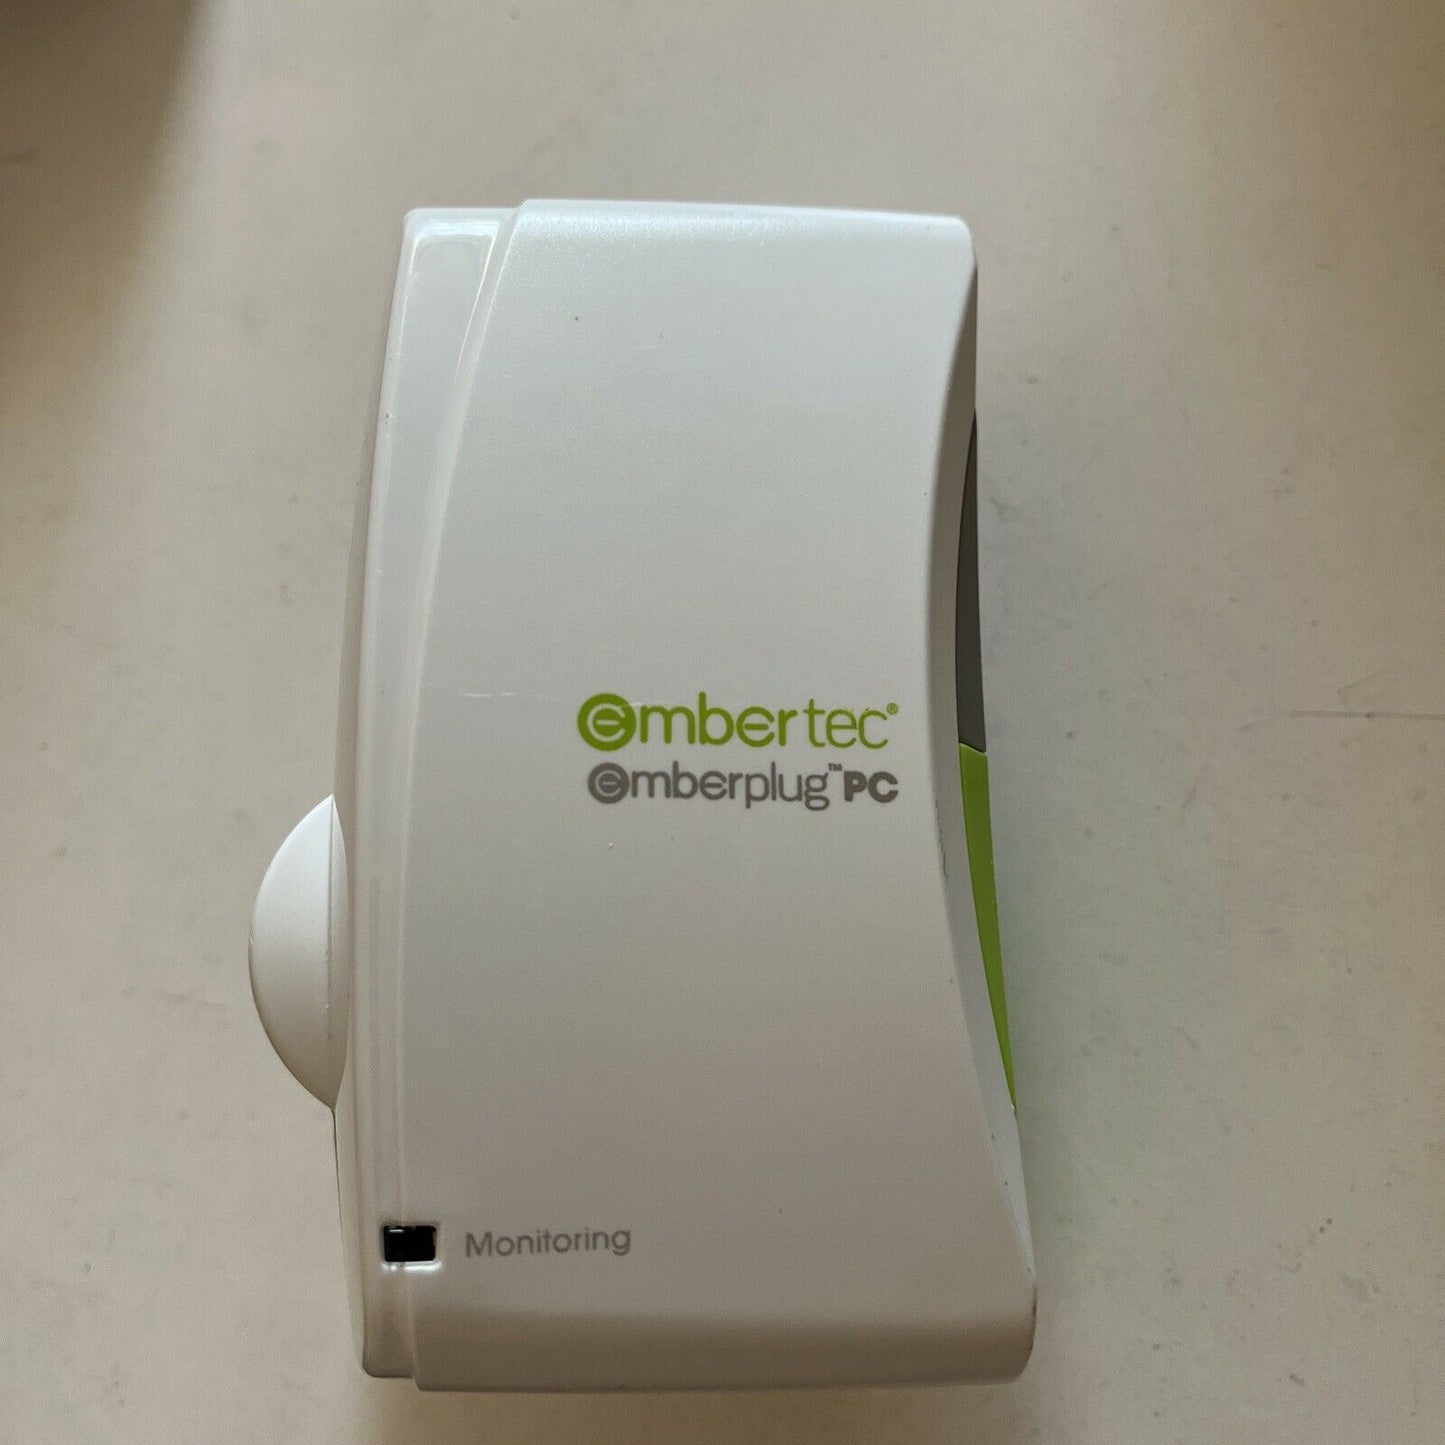 Embertec SmartSwitch Standby Power Controller for PC - EmbertecPC-ET-01